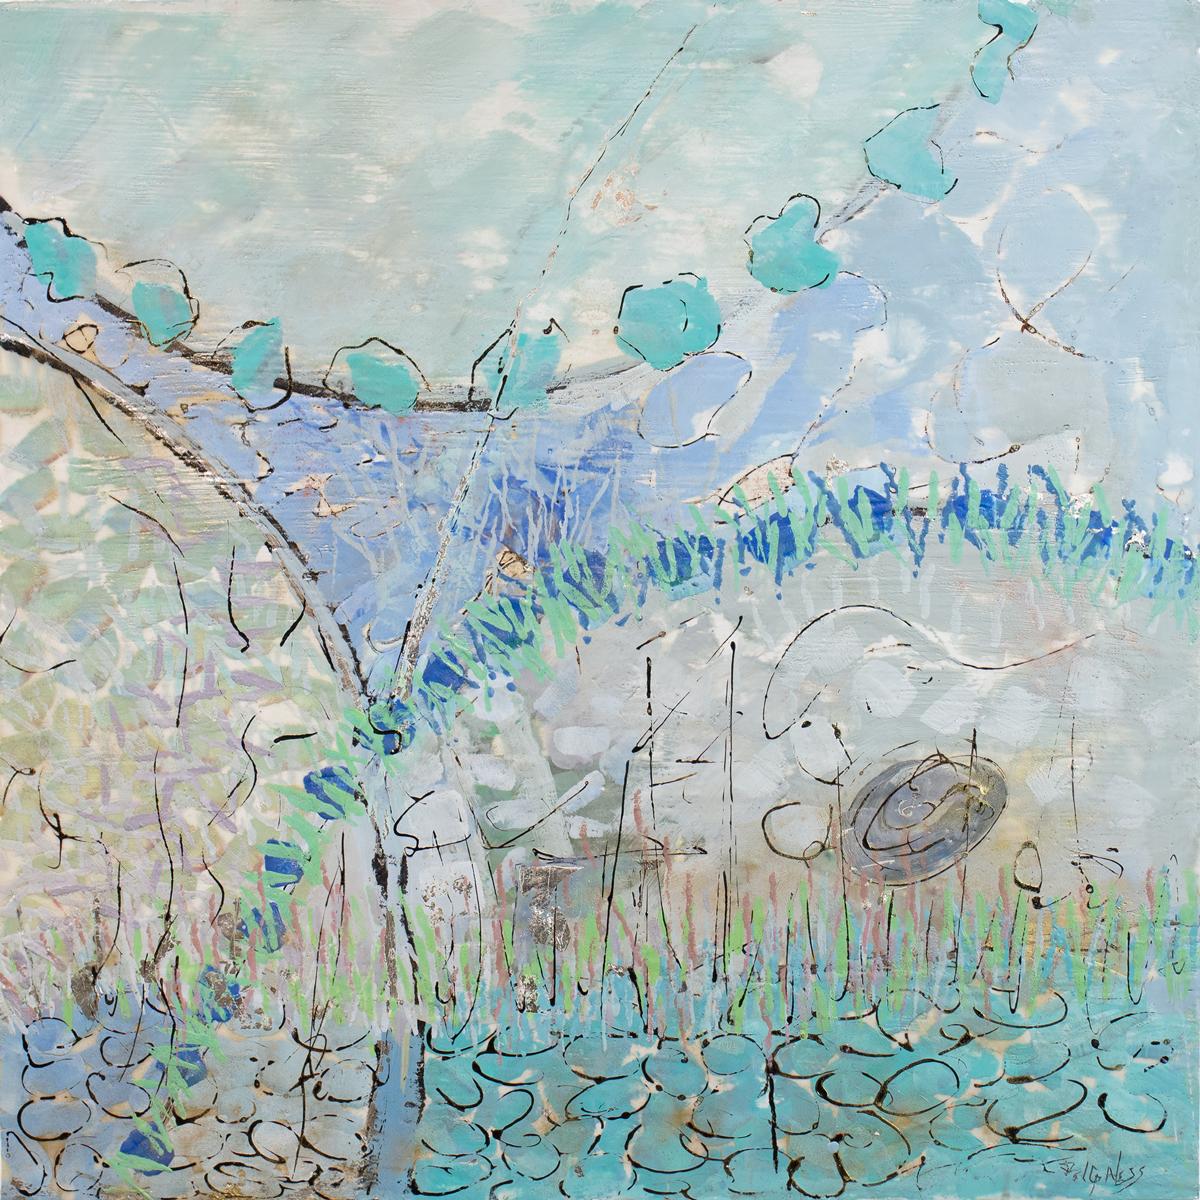 This is an abstract encaustic painting by Linda Bigness with silver leaf accents and neutral sides. It features a light blue and turquoise palette, with layered dabs of paint and organic shapes throughout. It is signed by the artist in the lower